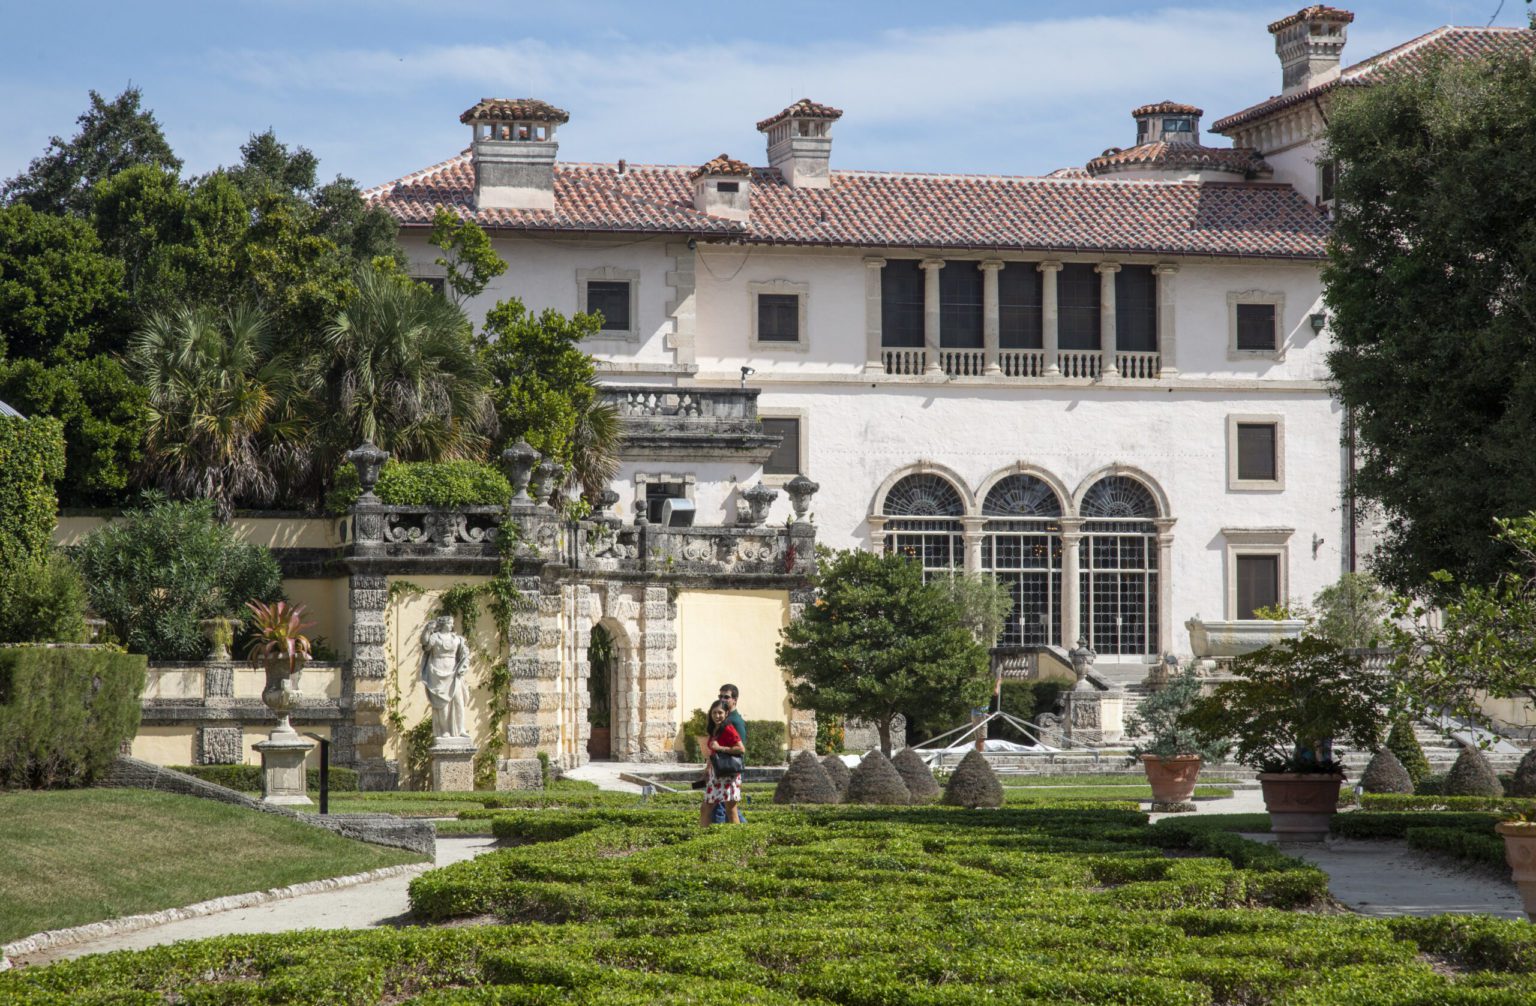 View of South Terrace of Vizcaya Museum and Gardens with green parterres in the foreground.